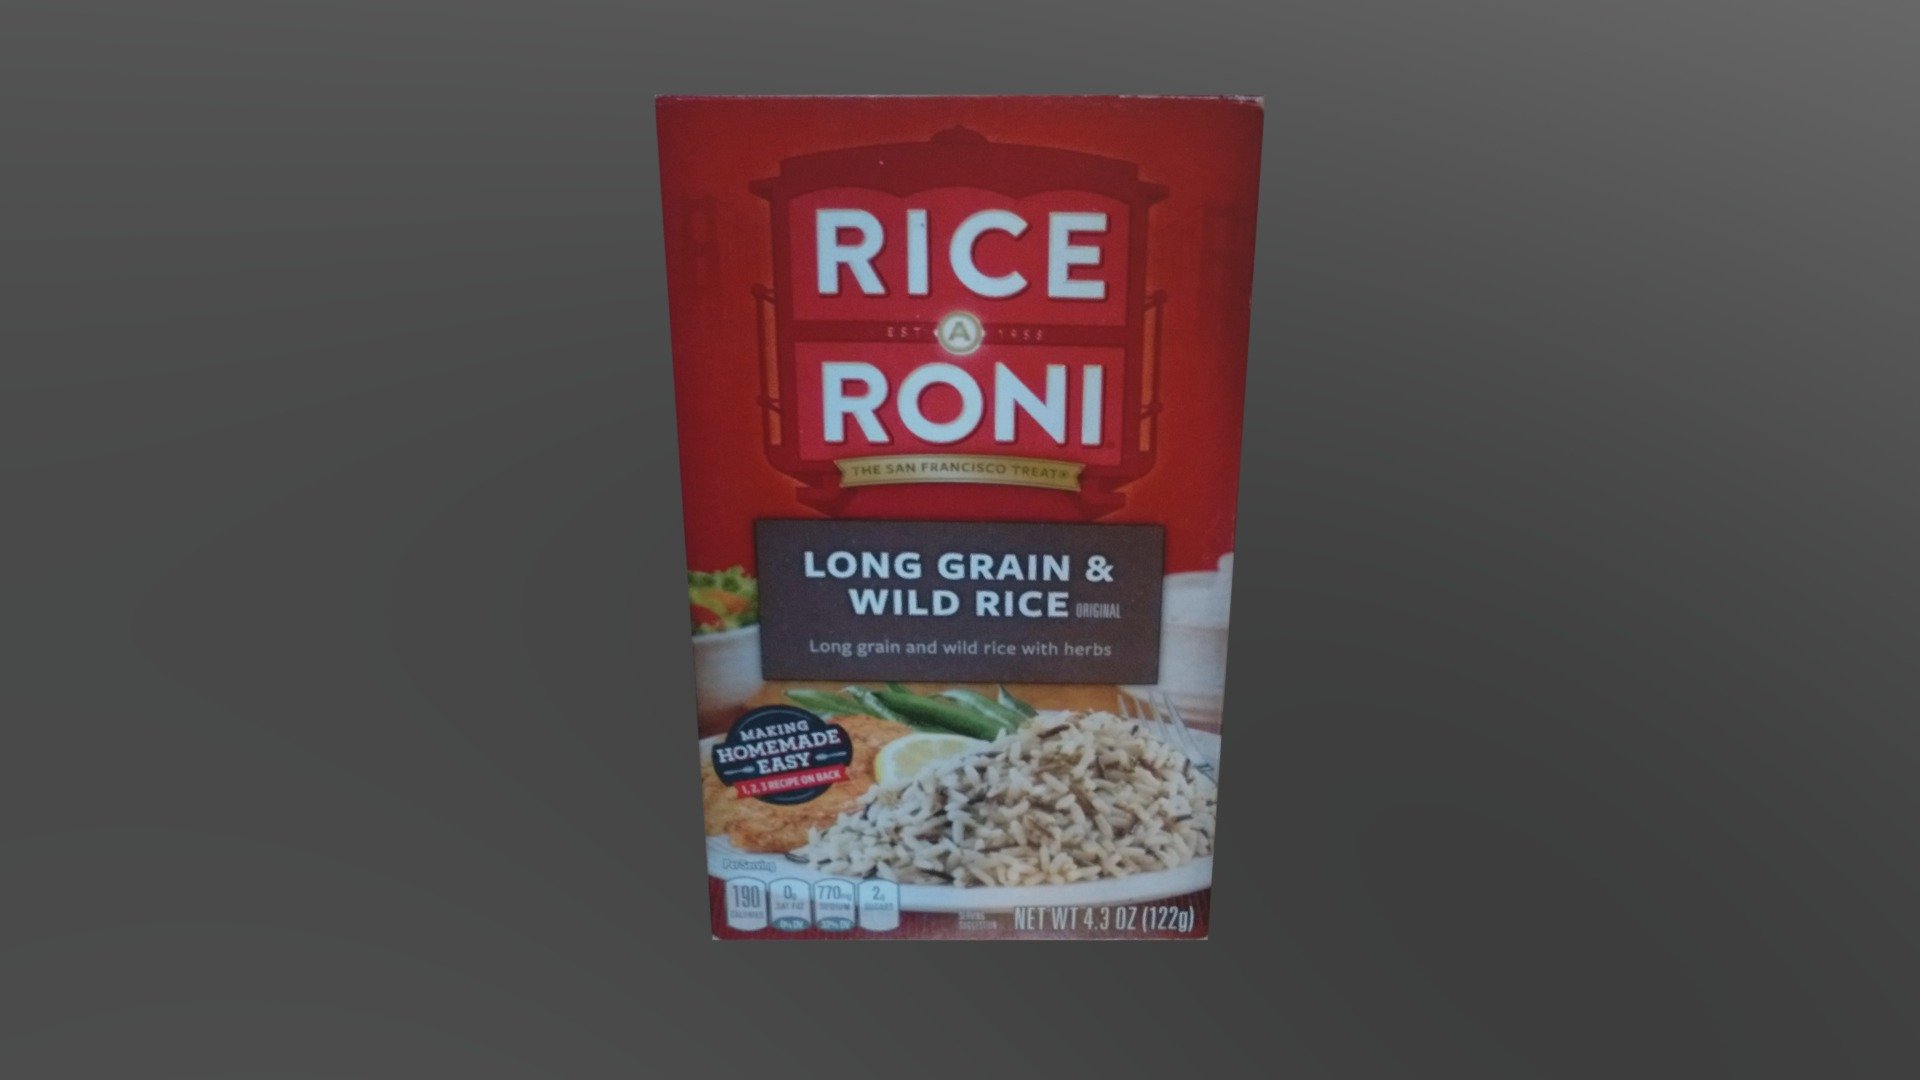 Doing a diorama of a grocery store or a display for Rice a Roni? Here ya go.

Want to use this in one of your builds? Go ahead. I give full permission to use this model as long as no one uploads and claims this as their own. If you enjoy my work and would like something custom made, don’t hesitate to reach out to me 3d model